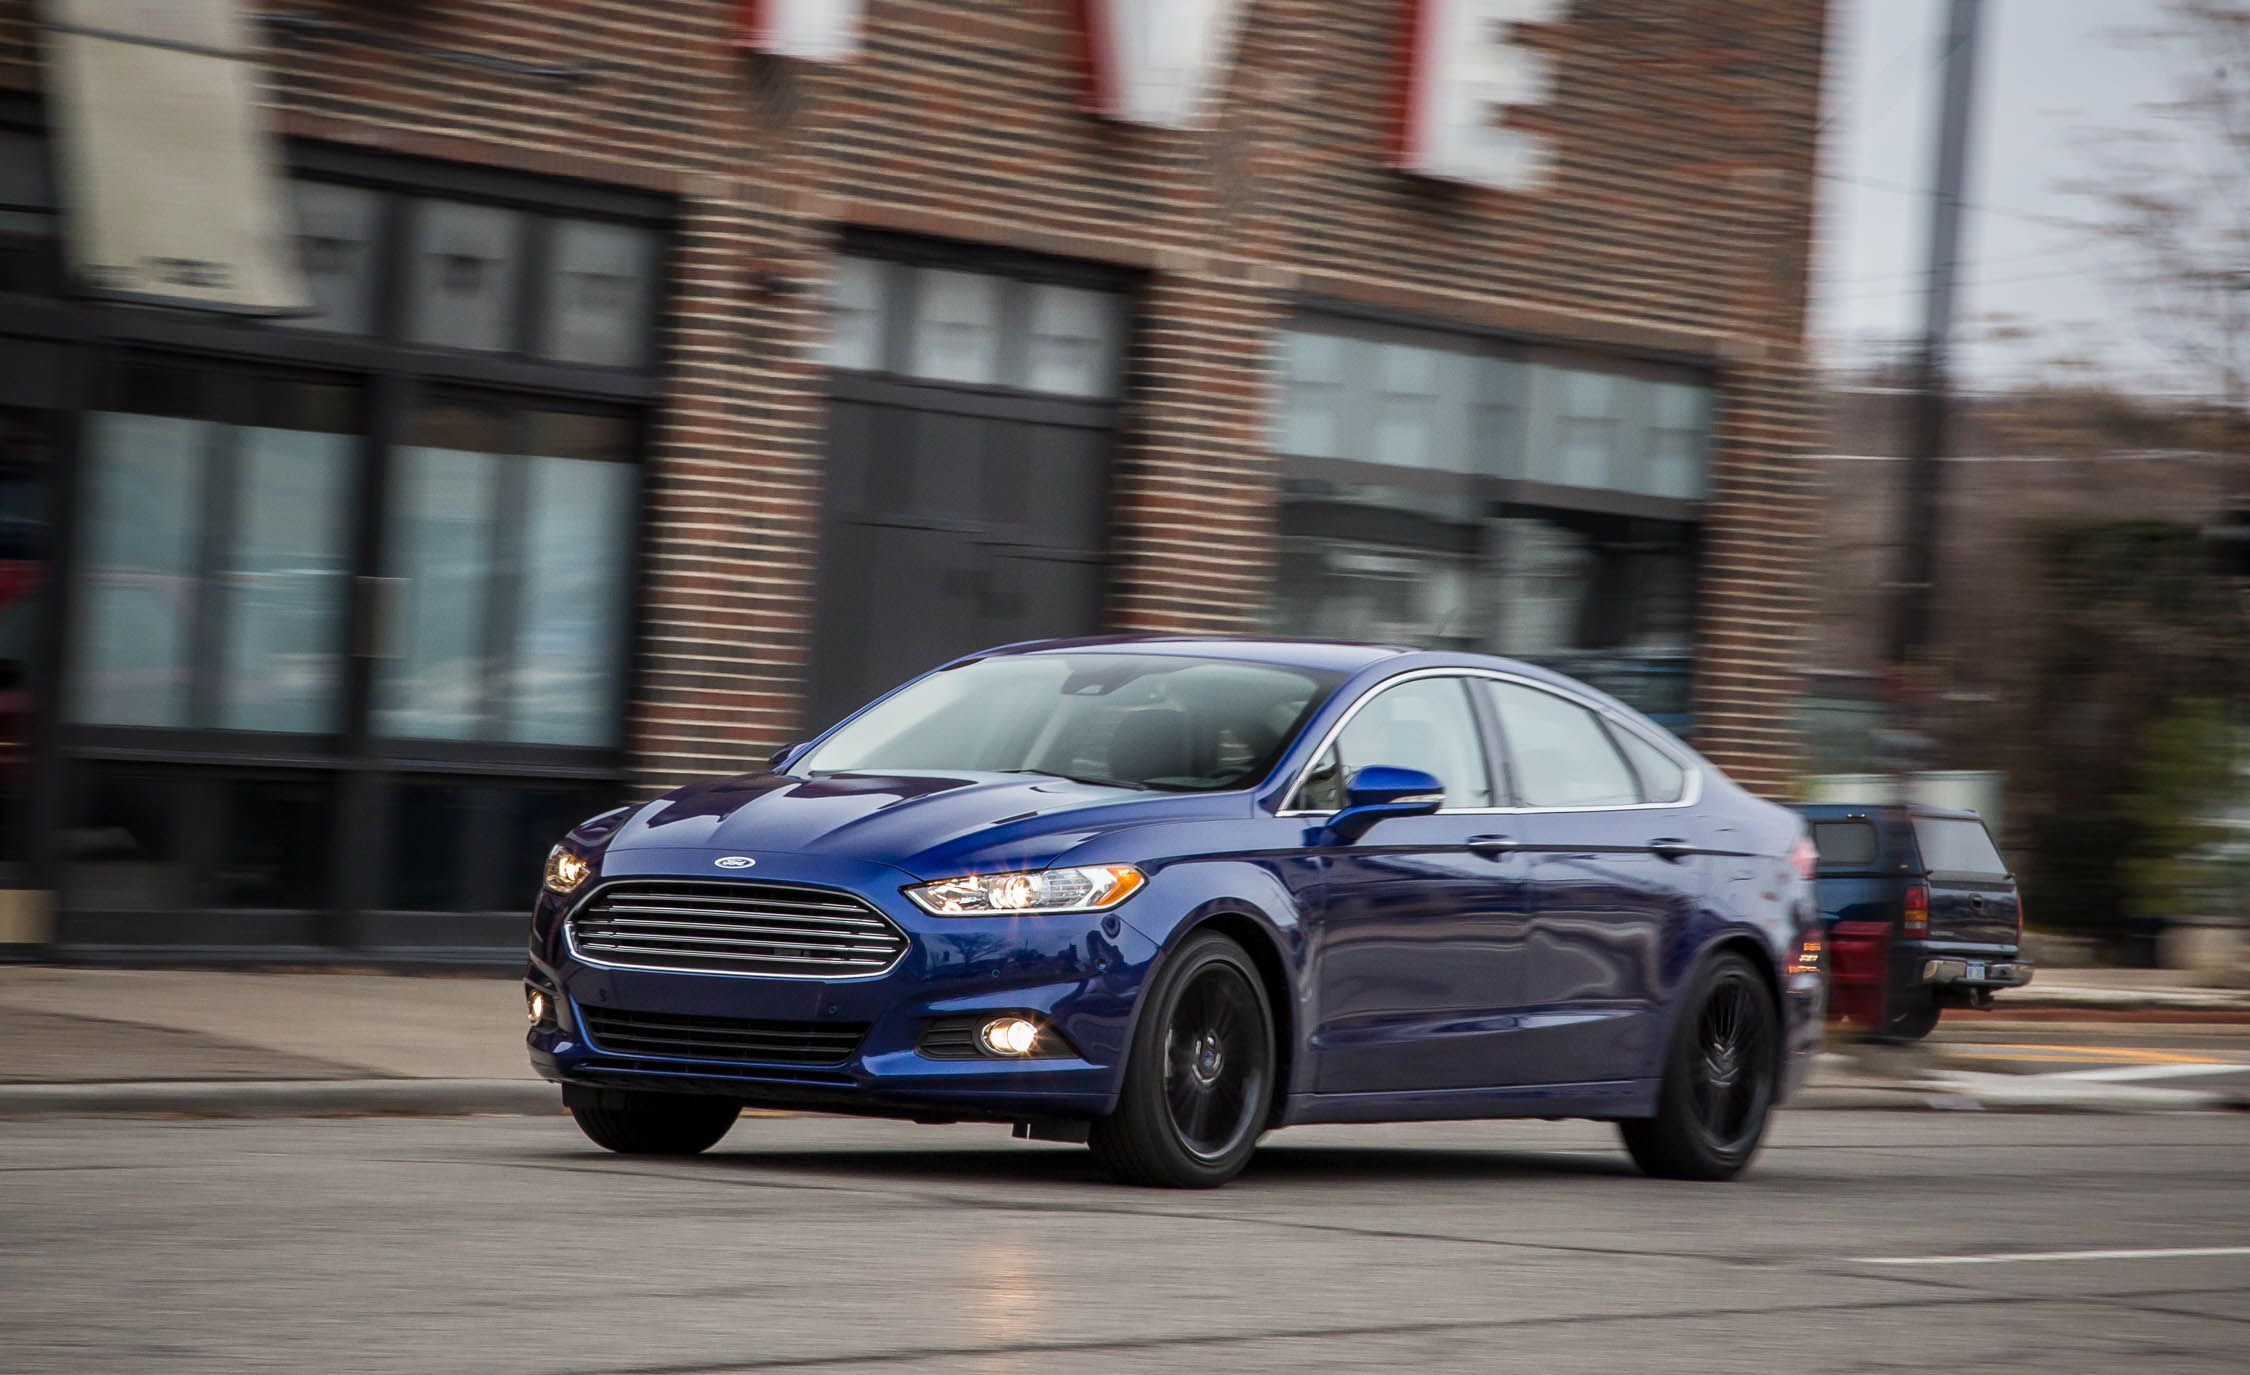 2016 Ford Fusion : Latest Prices, Reviews, Specs, Photos and